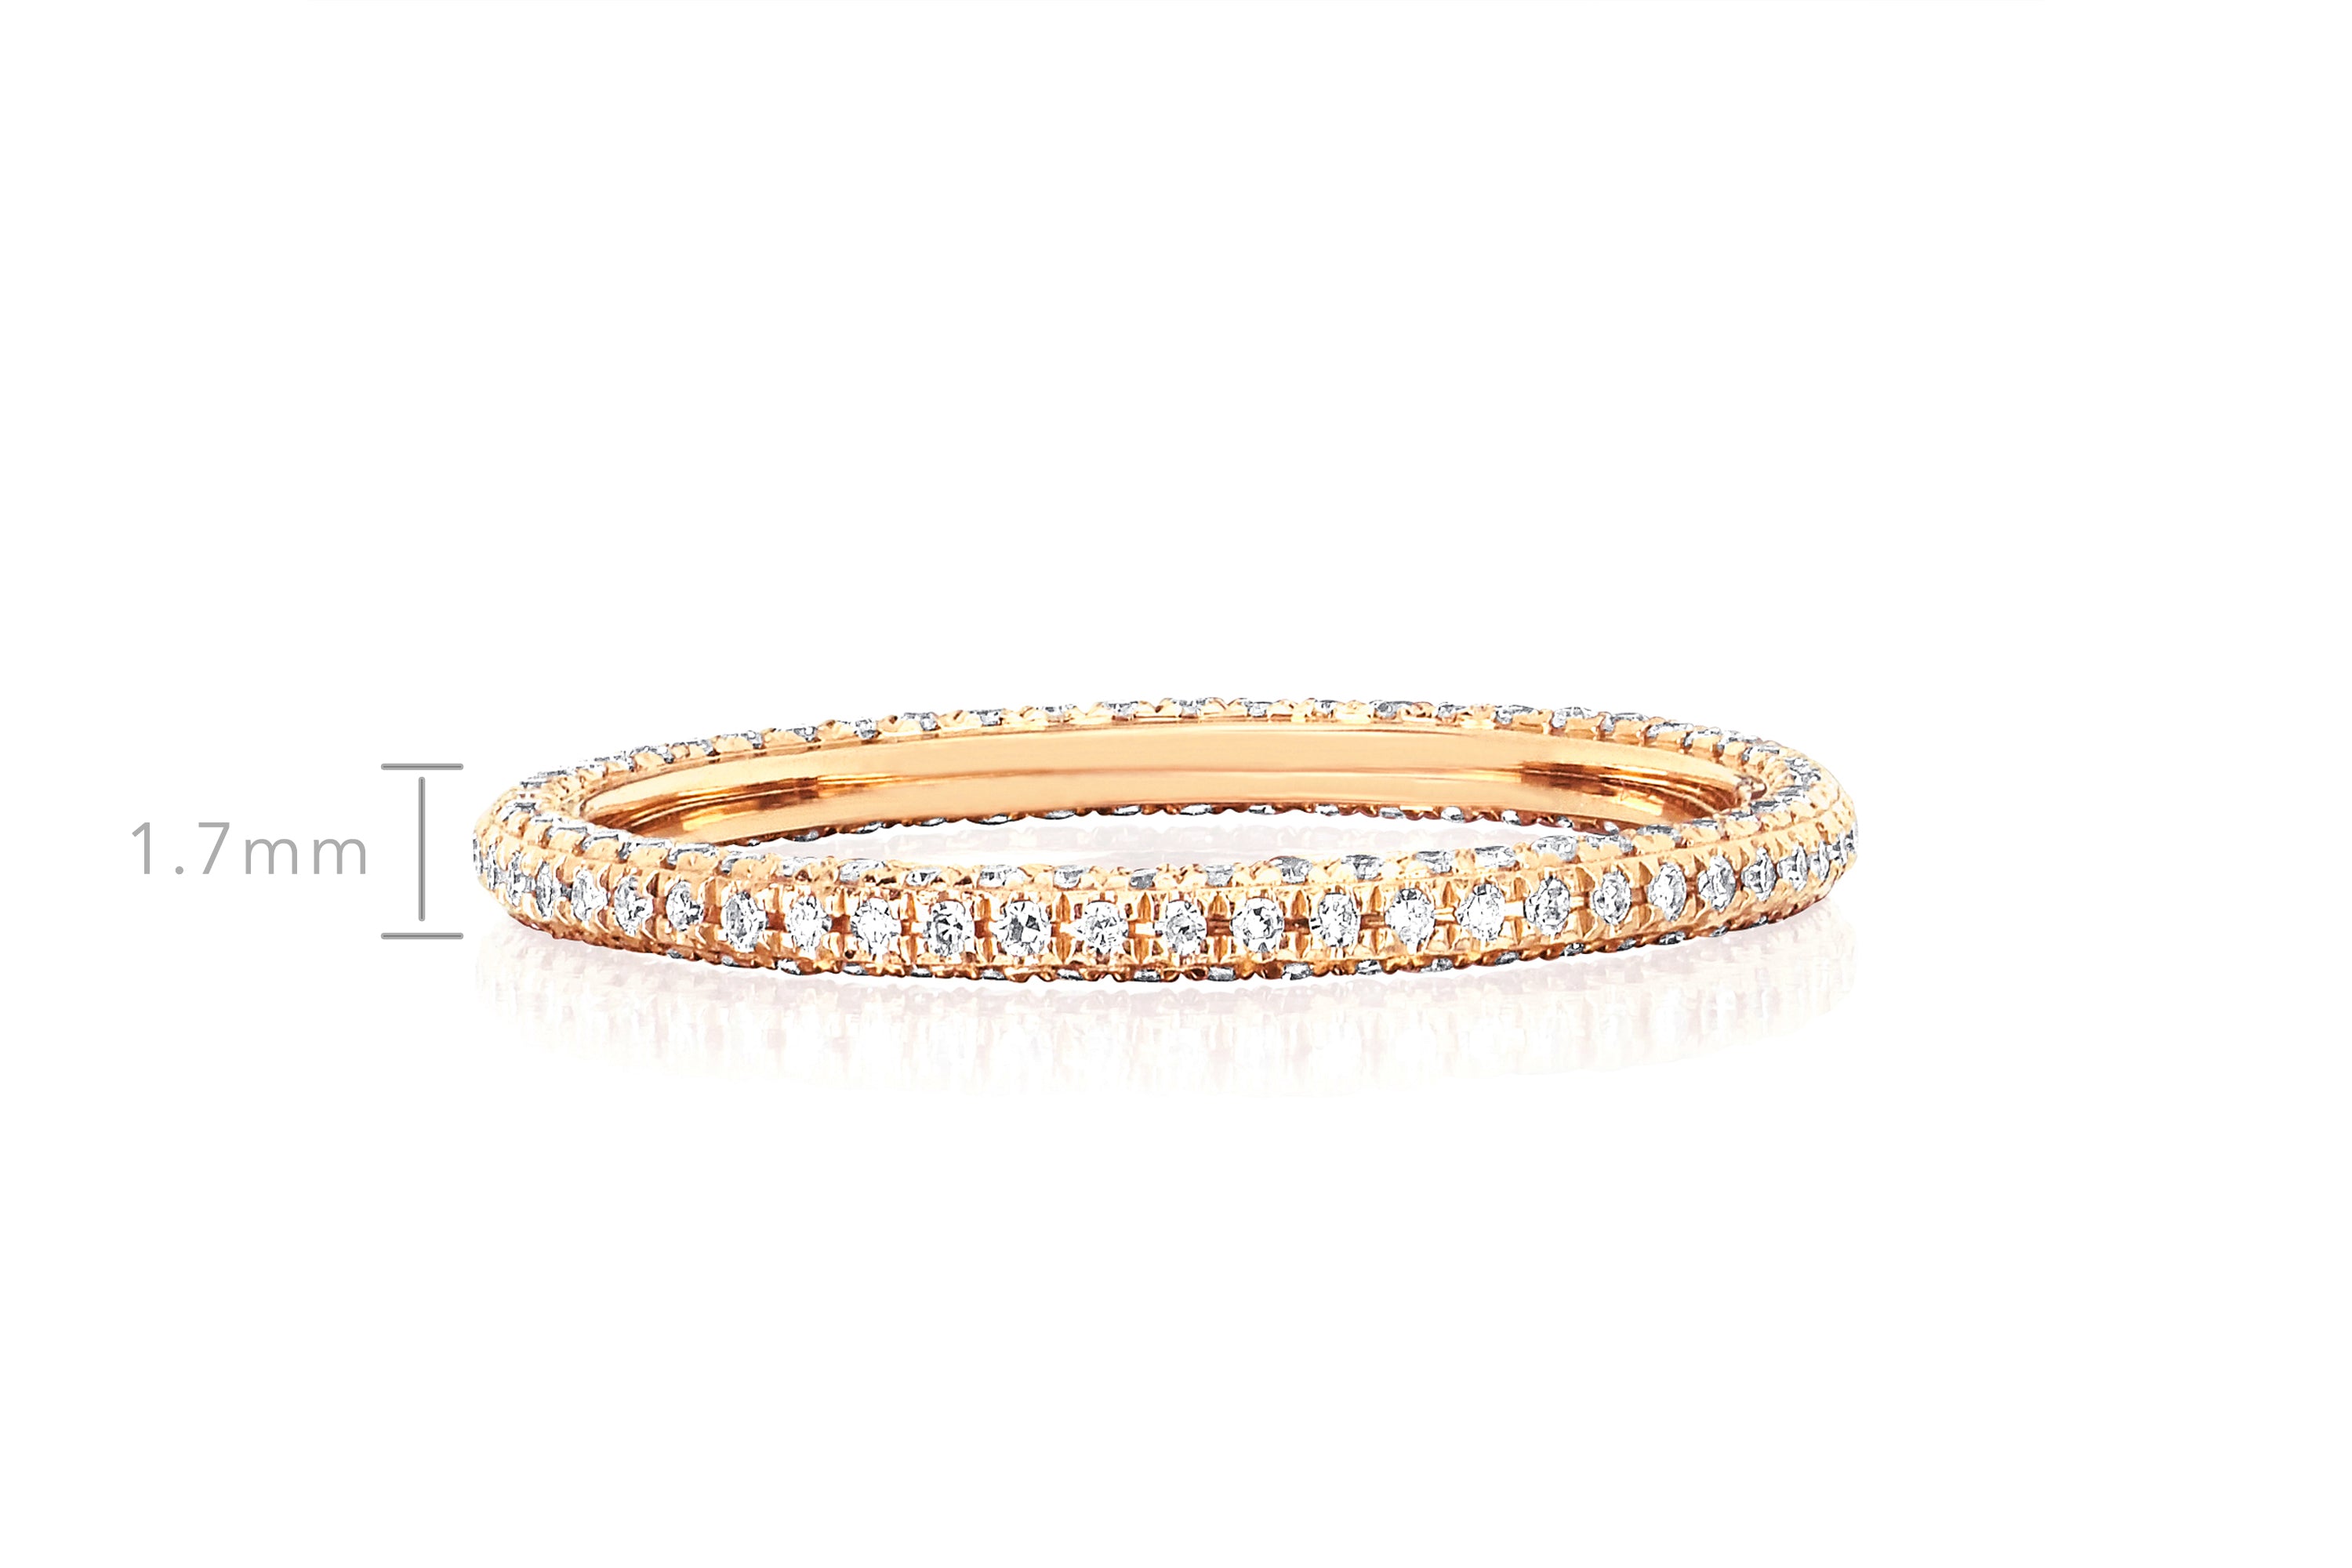 3 Sided Diamond Eternity Band Ring in 14k white gold with height measurement of 1.7mm